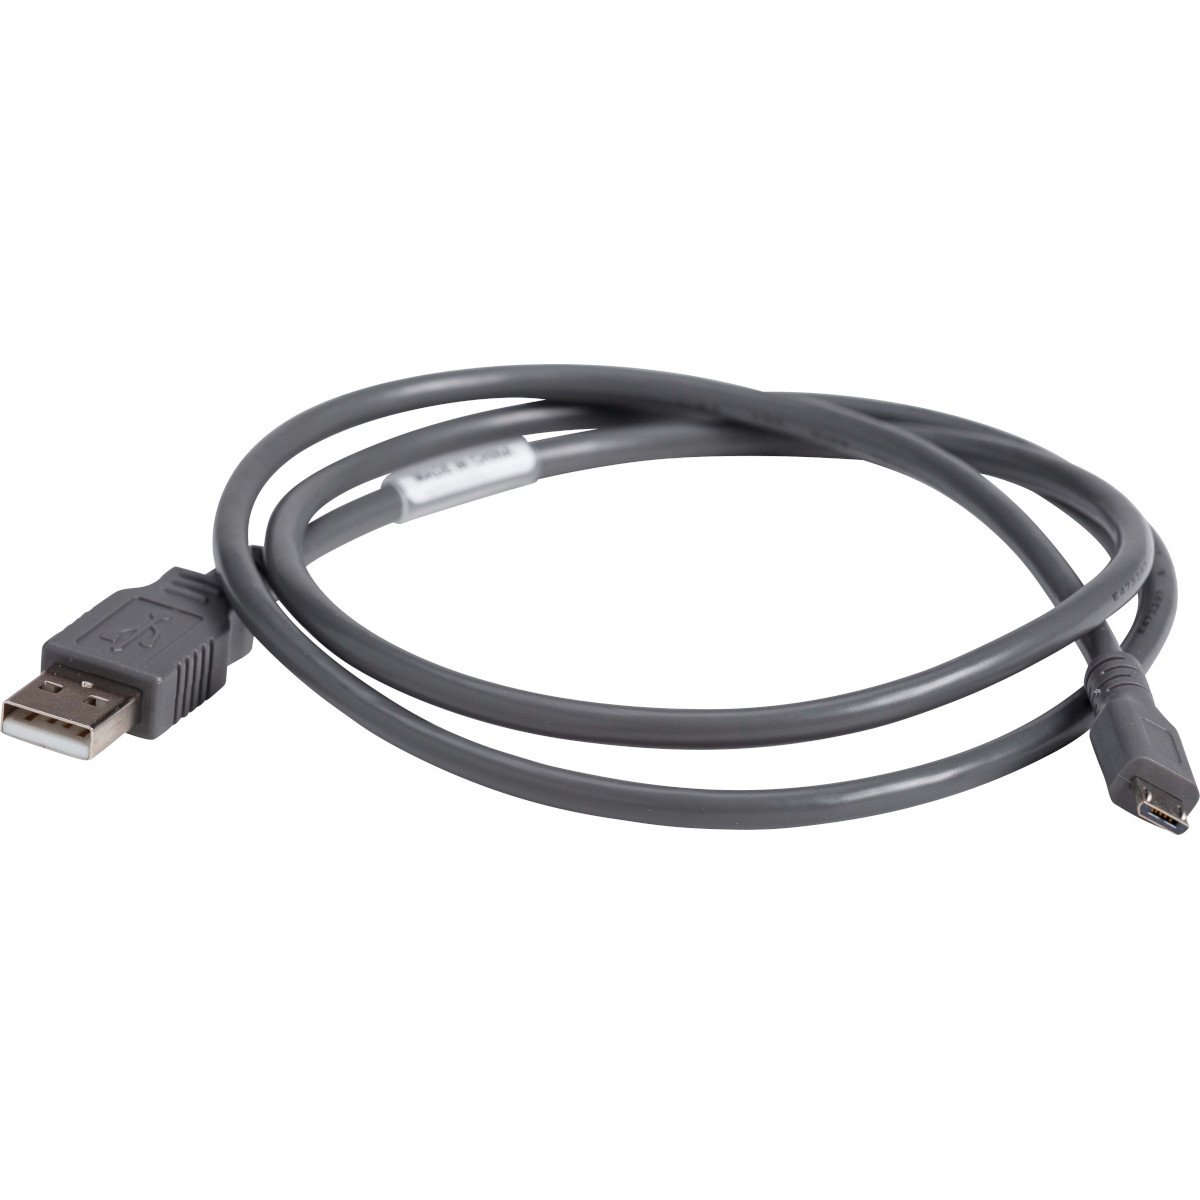 USB to RJ50 6' Cable for Code